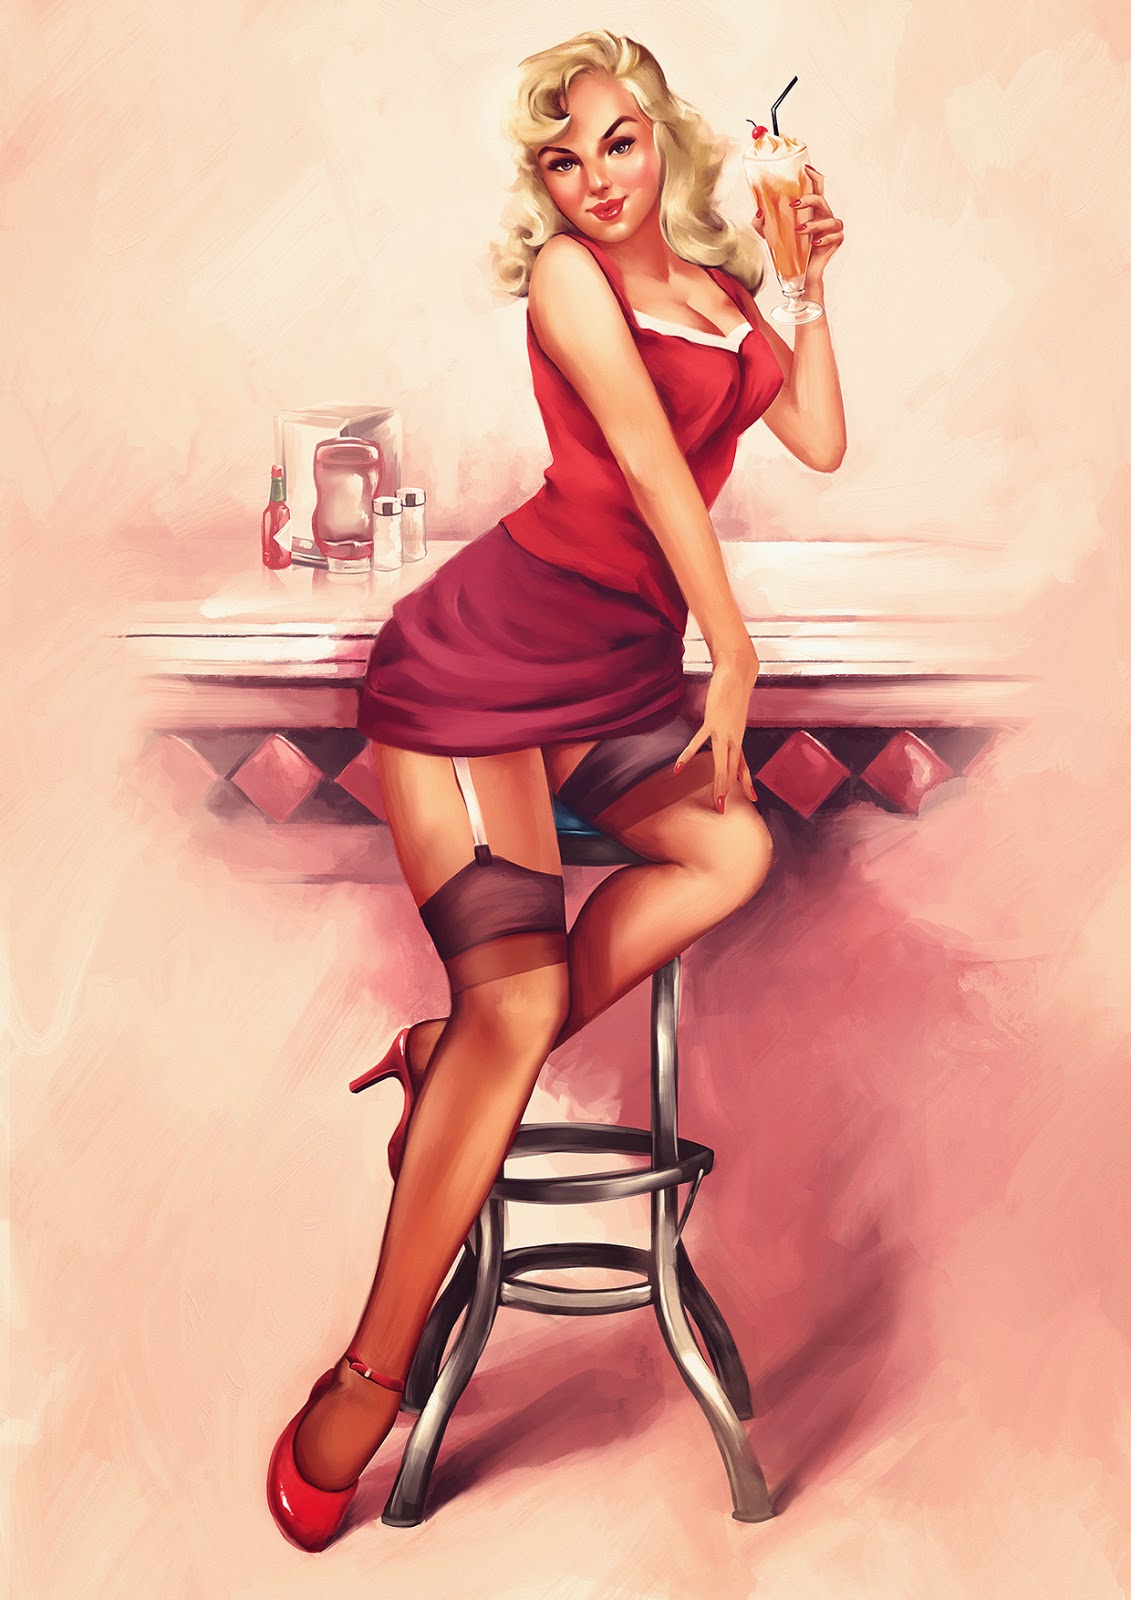 Guilherme Asthma – Pin Up and Cartoon Girls Art | Vintage and Modern